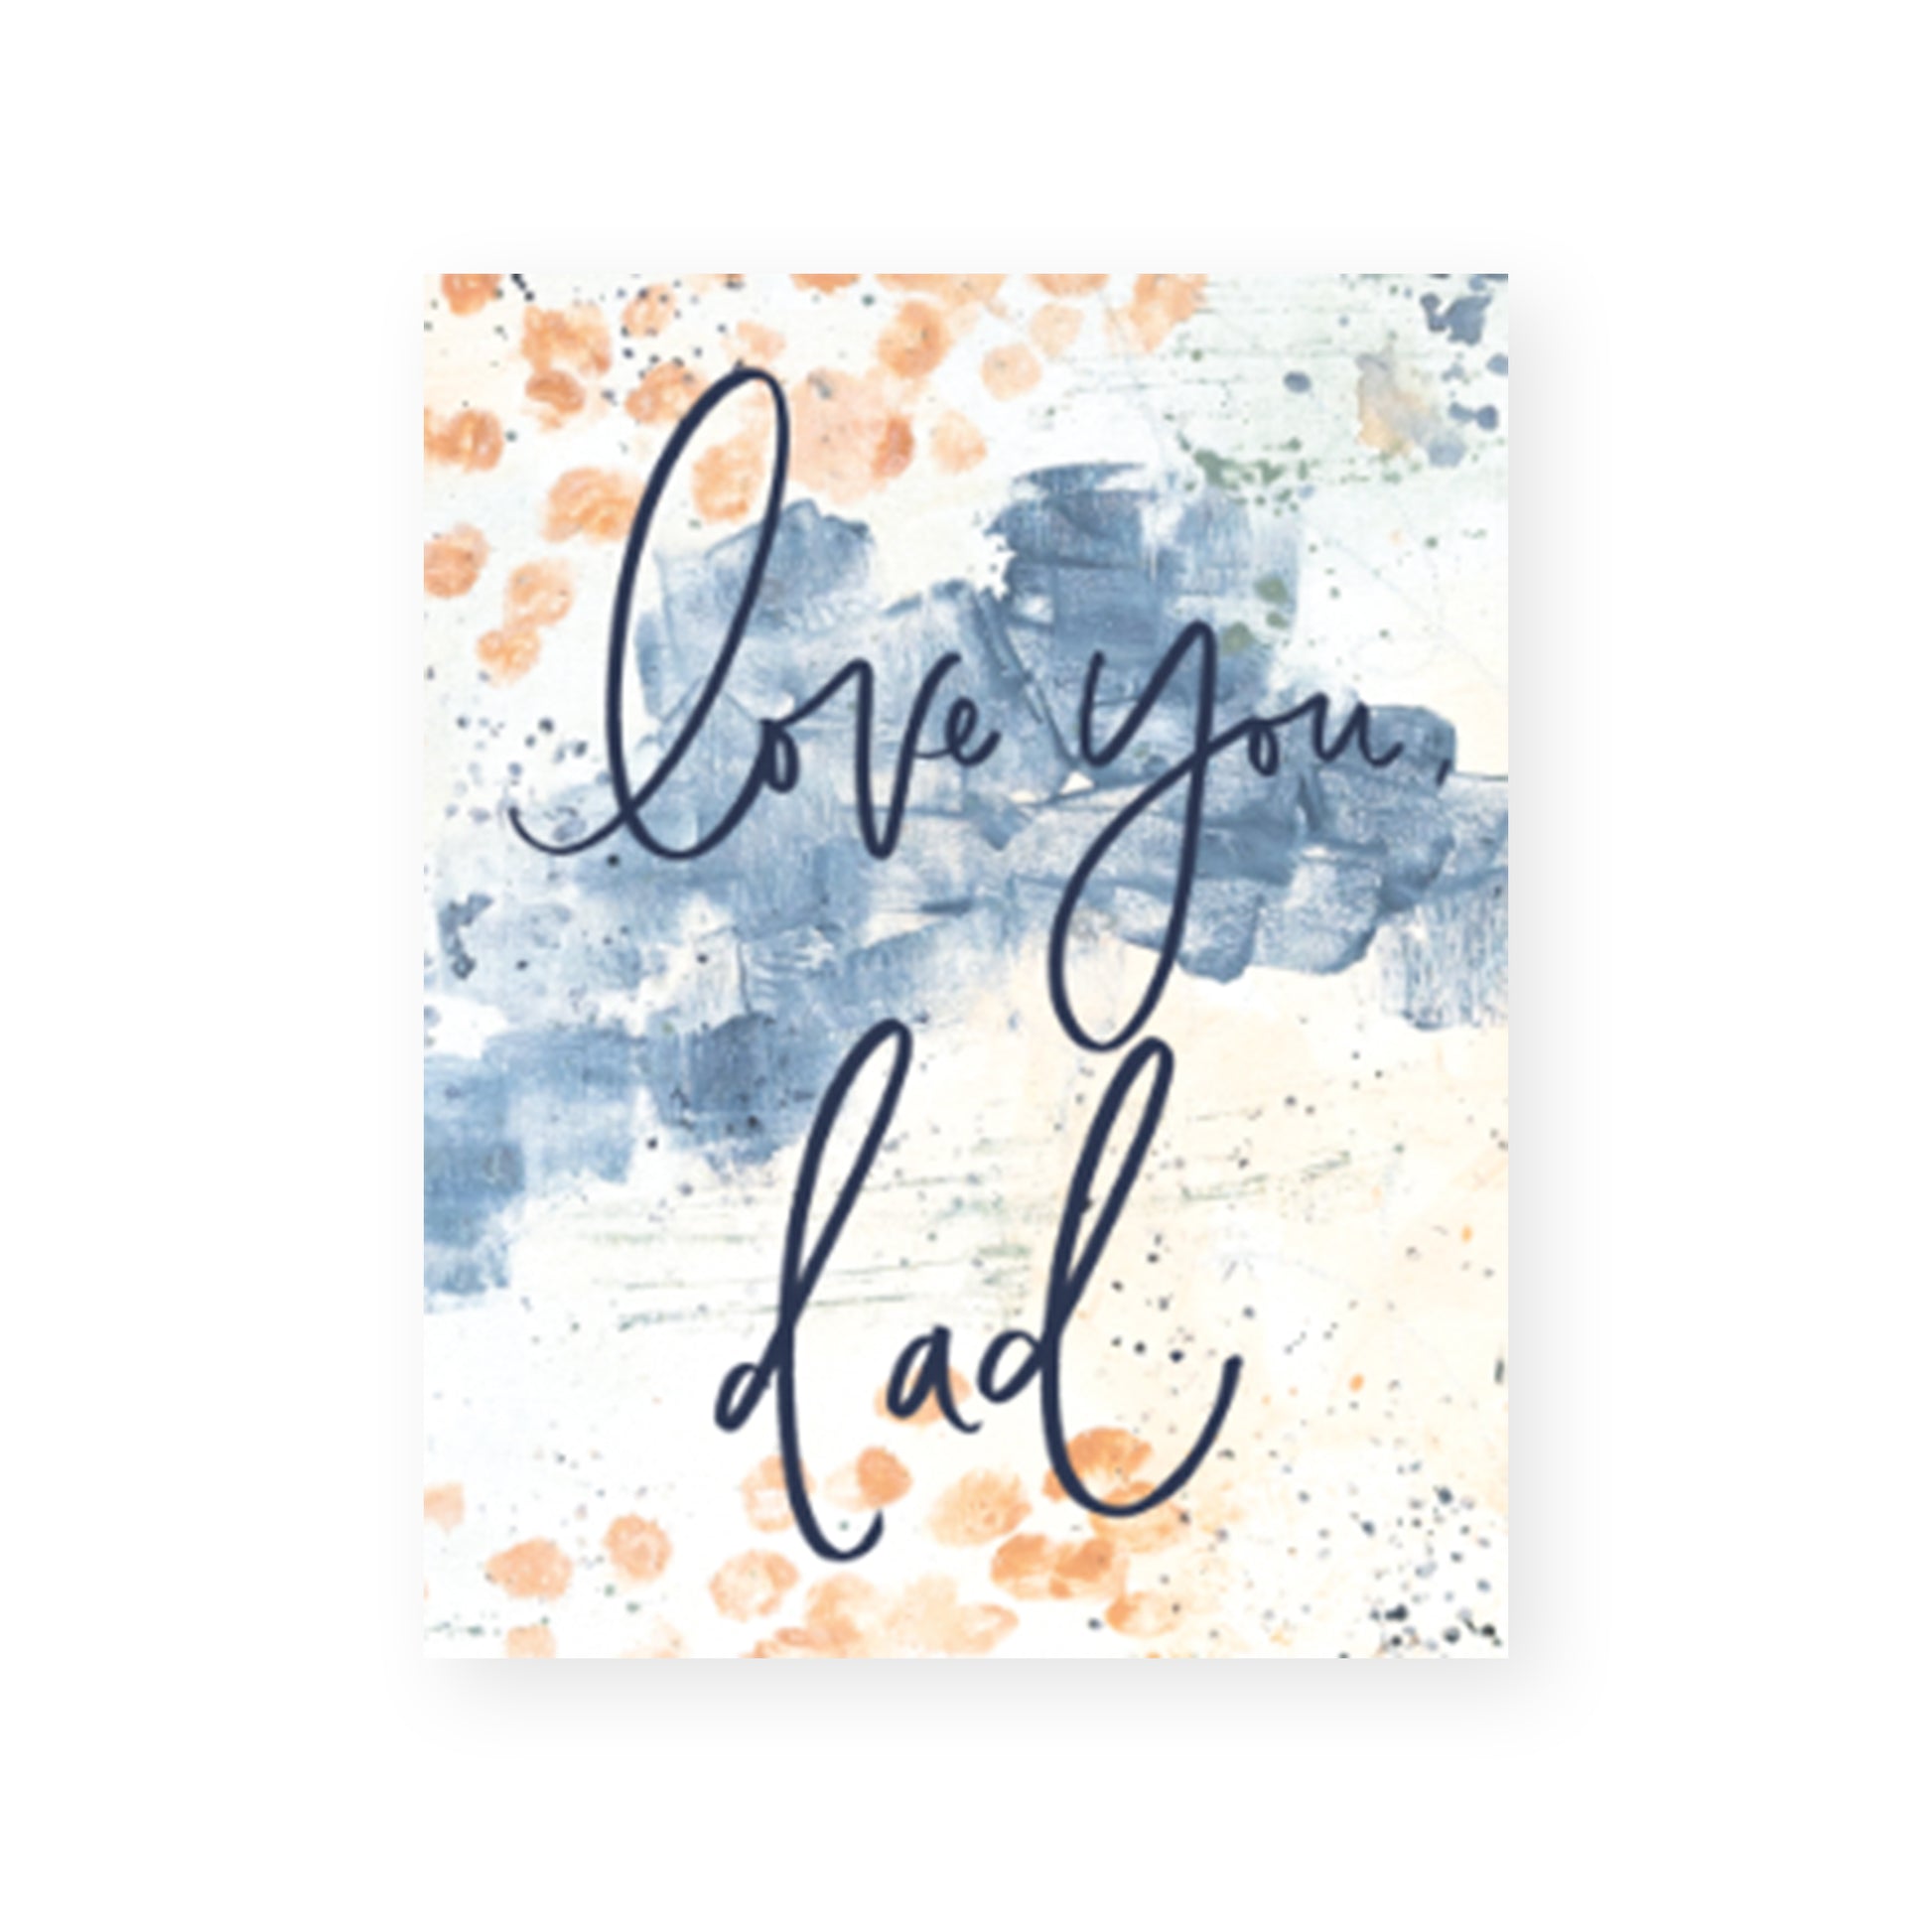 oh joyful day greeting card encouragement cards illustration pittsburgh artist pittsburgh art pittsburgh illustrator pittsburgh designer stationery design stationery designer stationery store pittsburgh stationery store online stationery store oh joyful day love you dad father's day card card for dad card for father